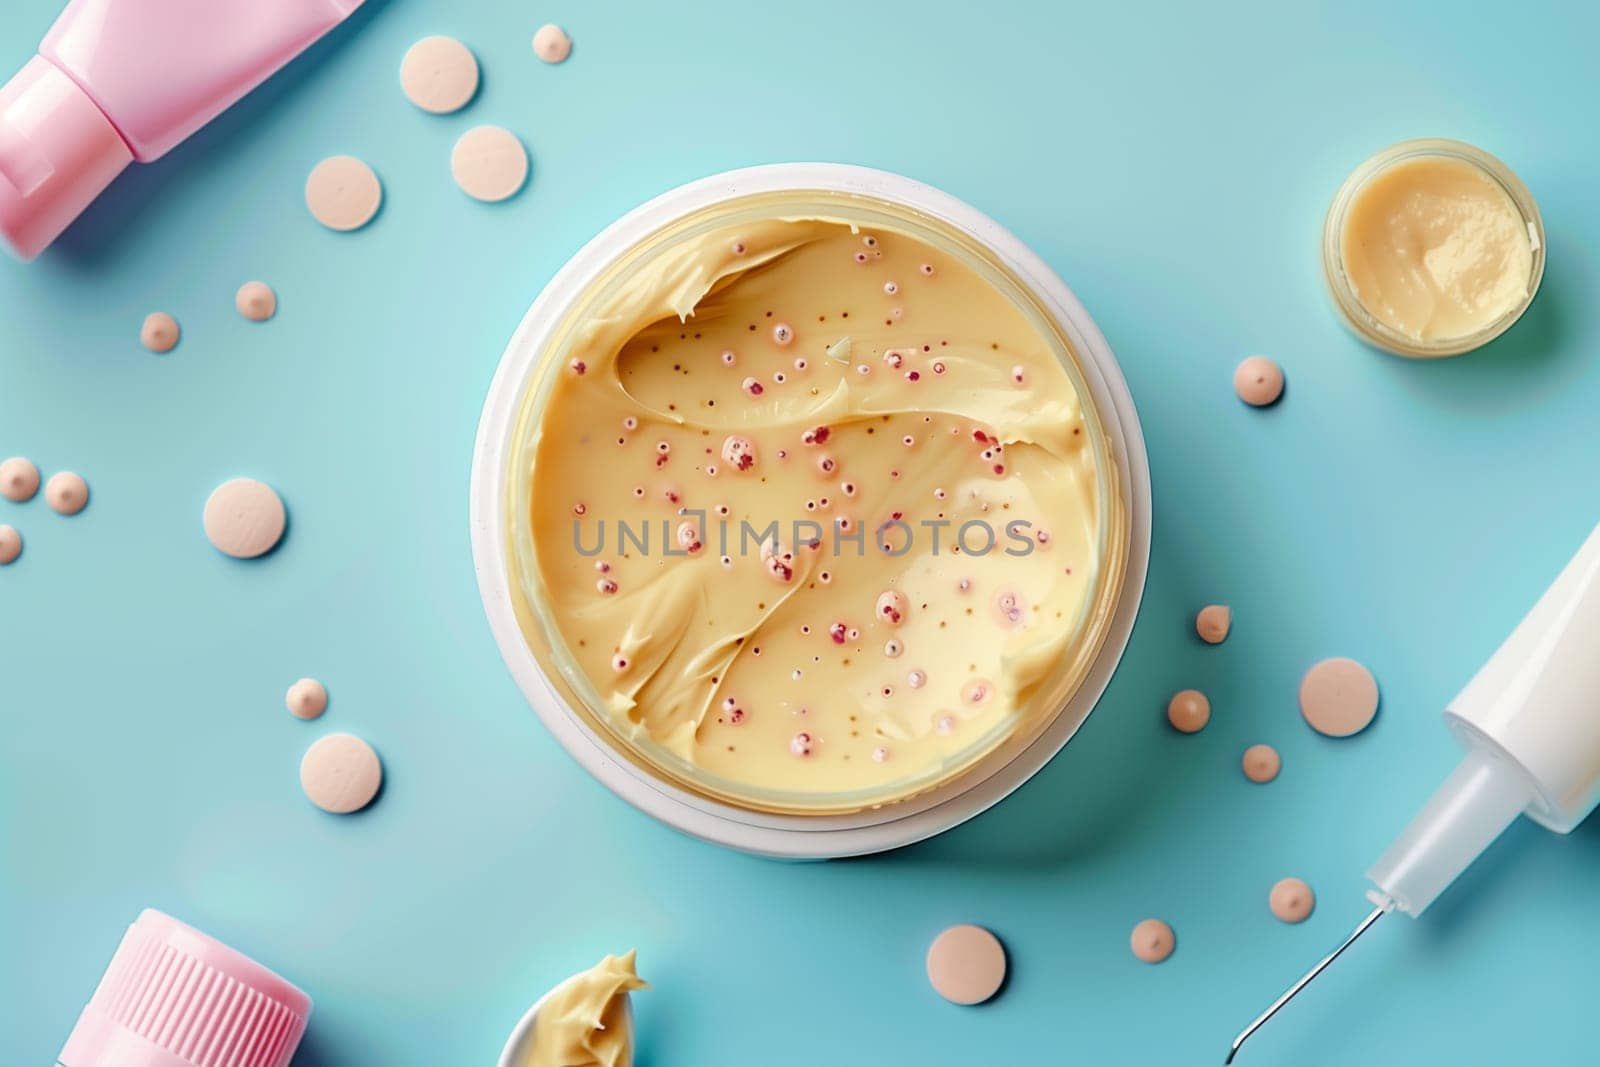 A bowl filled with yellow cream sits next to a baby bottle on a table. This cream is used for the treatment of chickenpox ulcers.